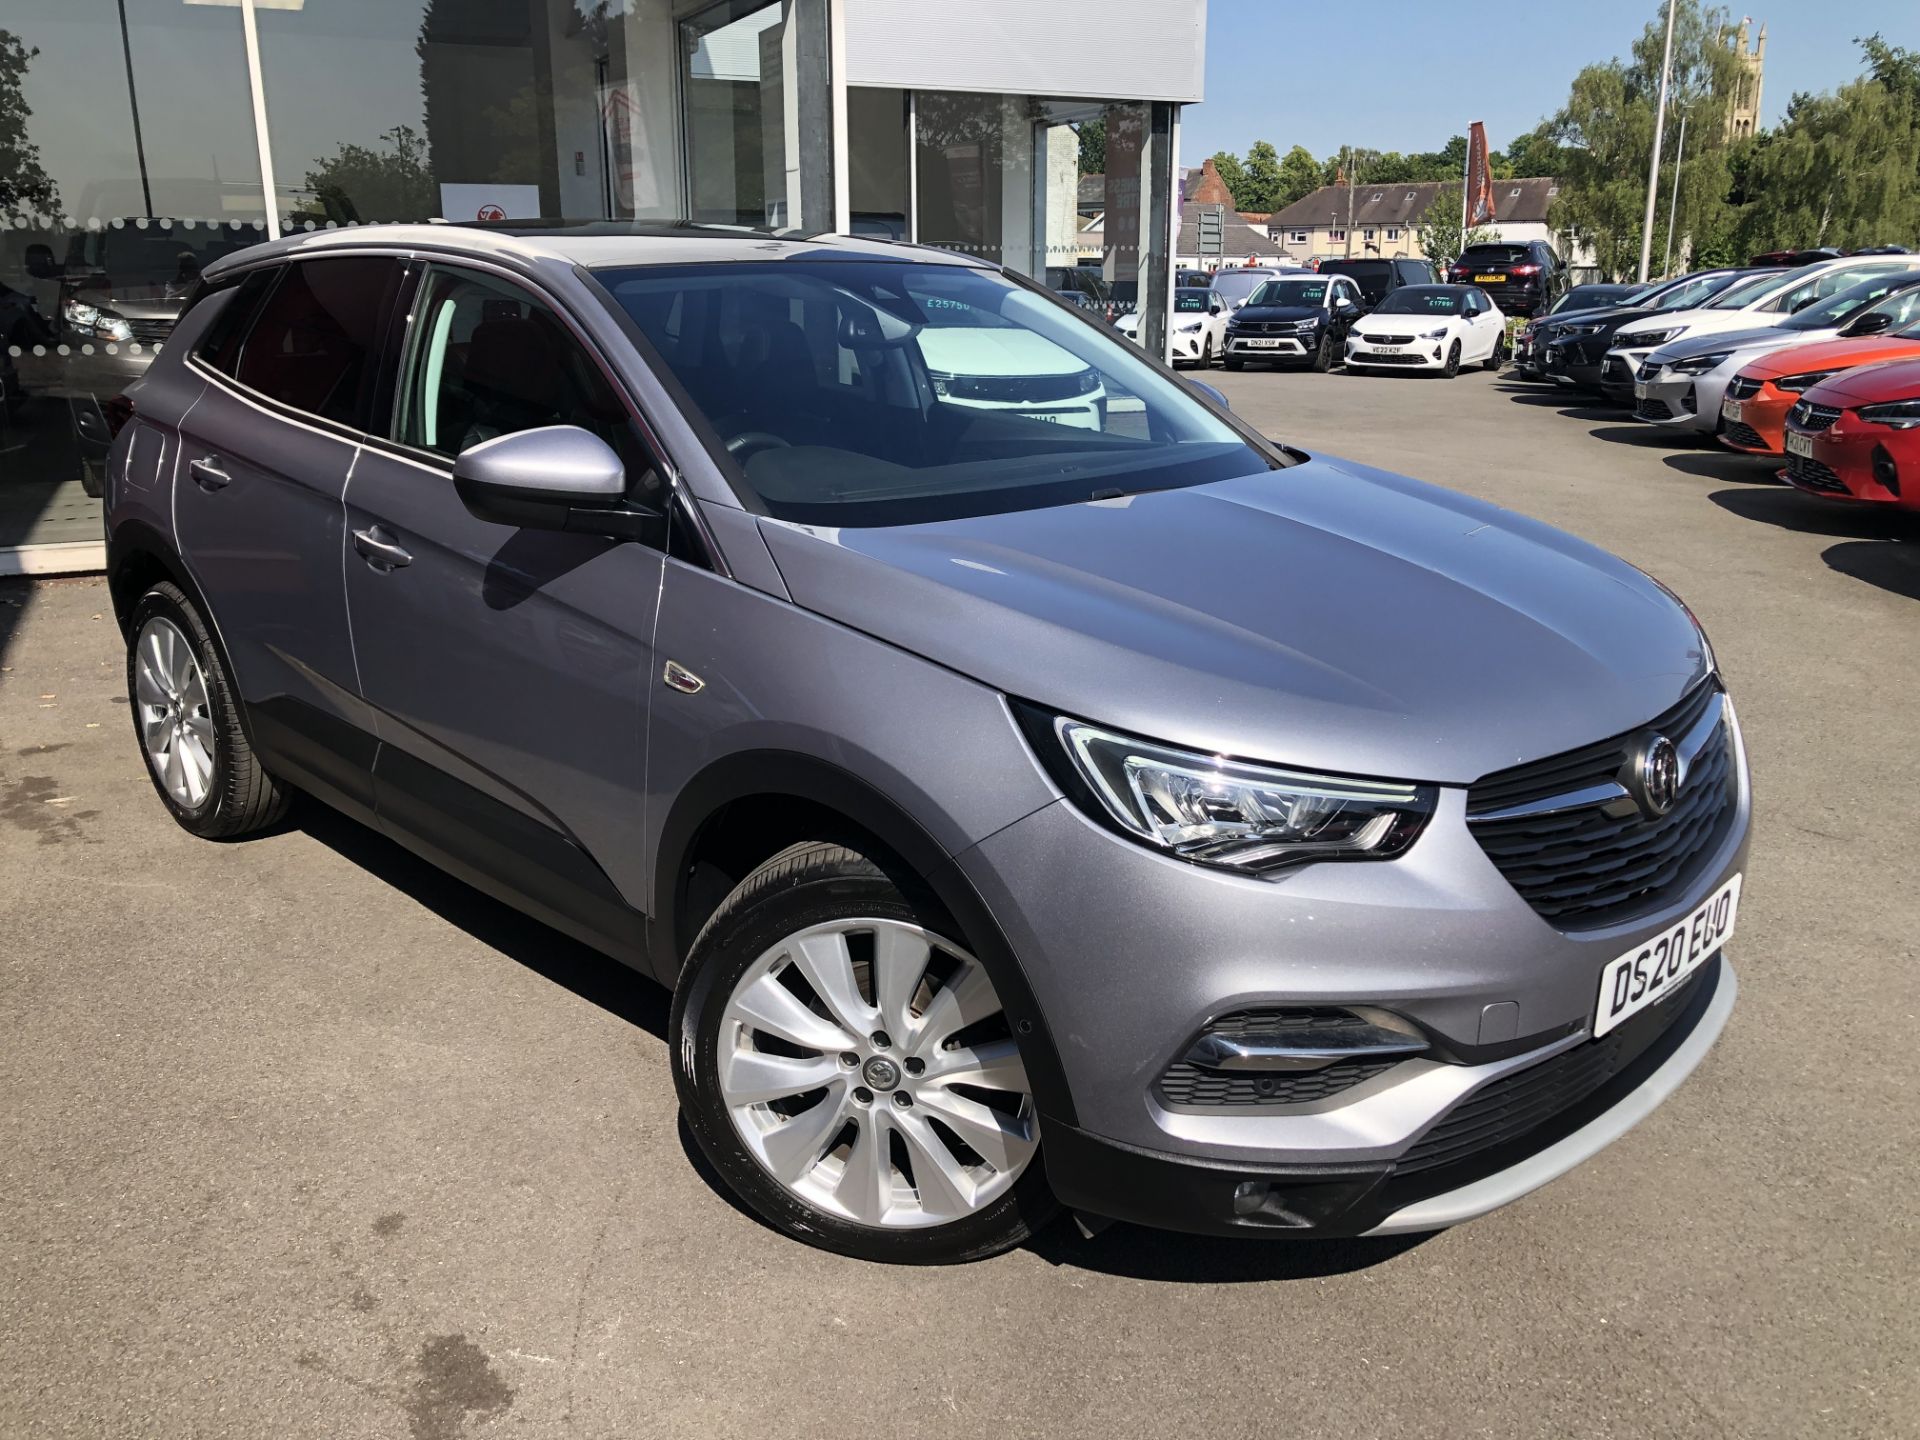 Vauxhall Grandland X 1.2T (130ps) Elite Nav 5dr Automatic, Registration: DS20EUO, Date First